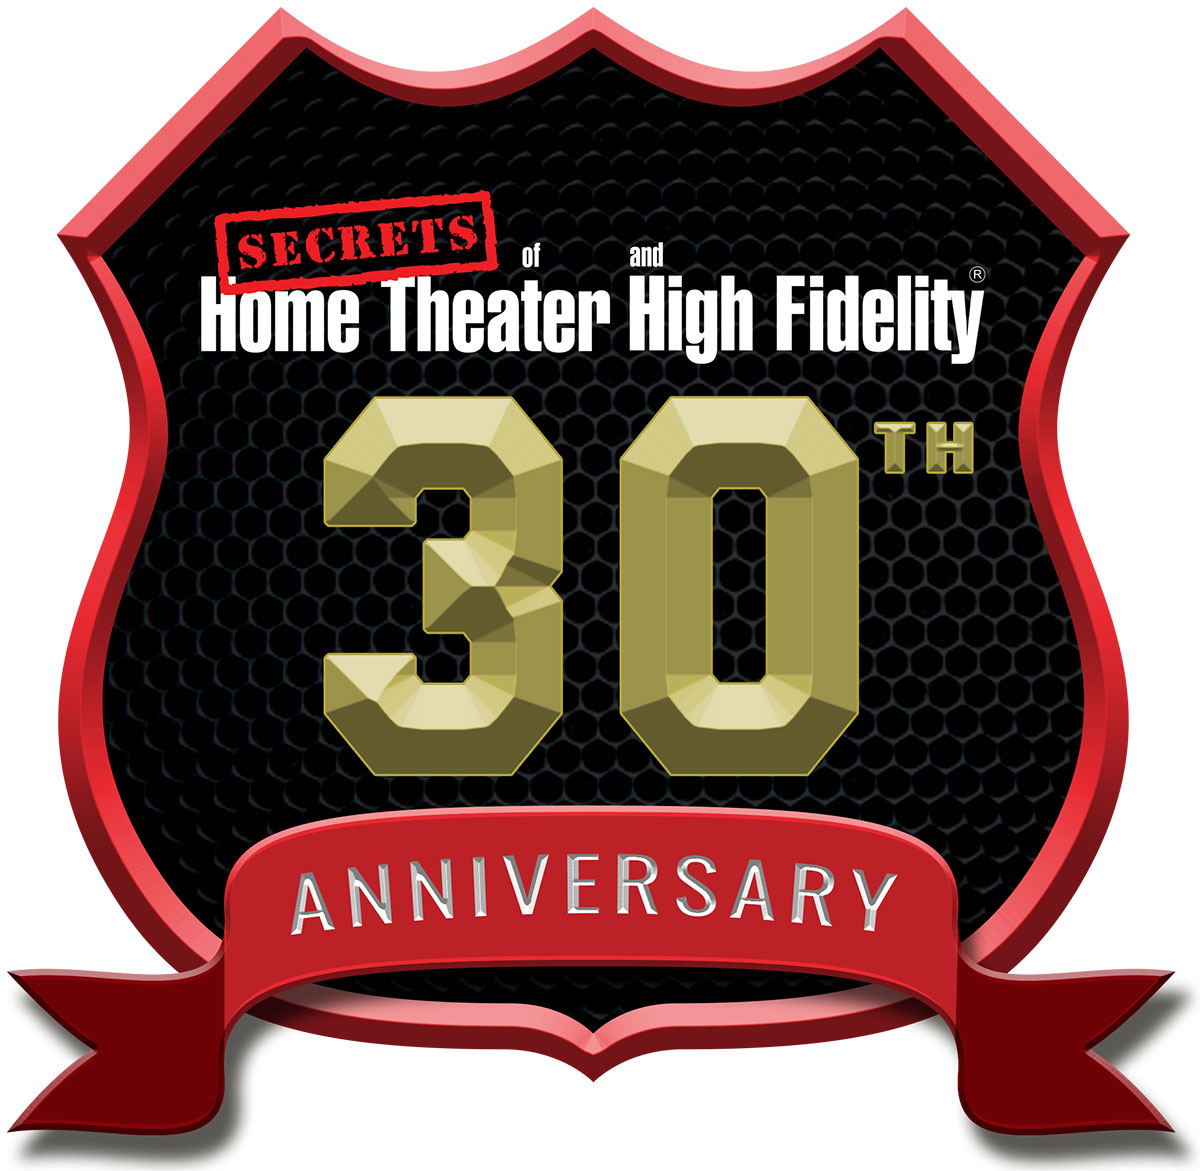 SECRETS of Home Theater and High Fidelity 30th Anniversary logo badge emblem